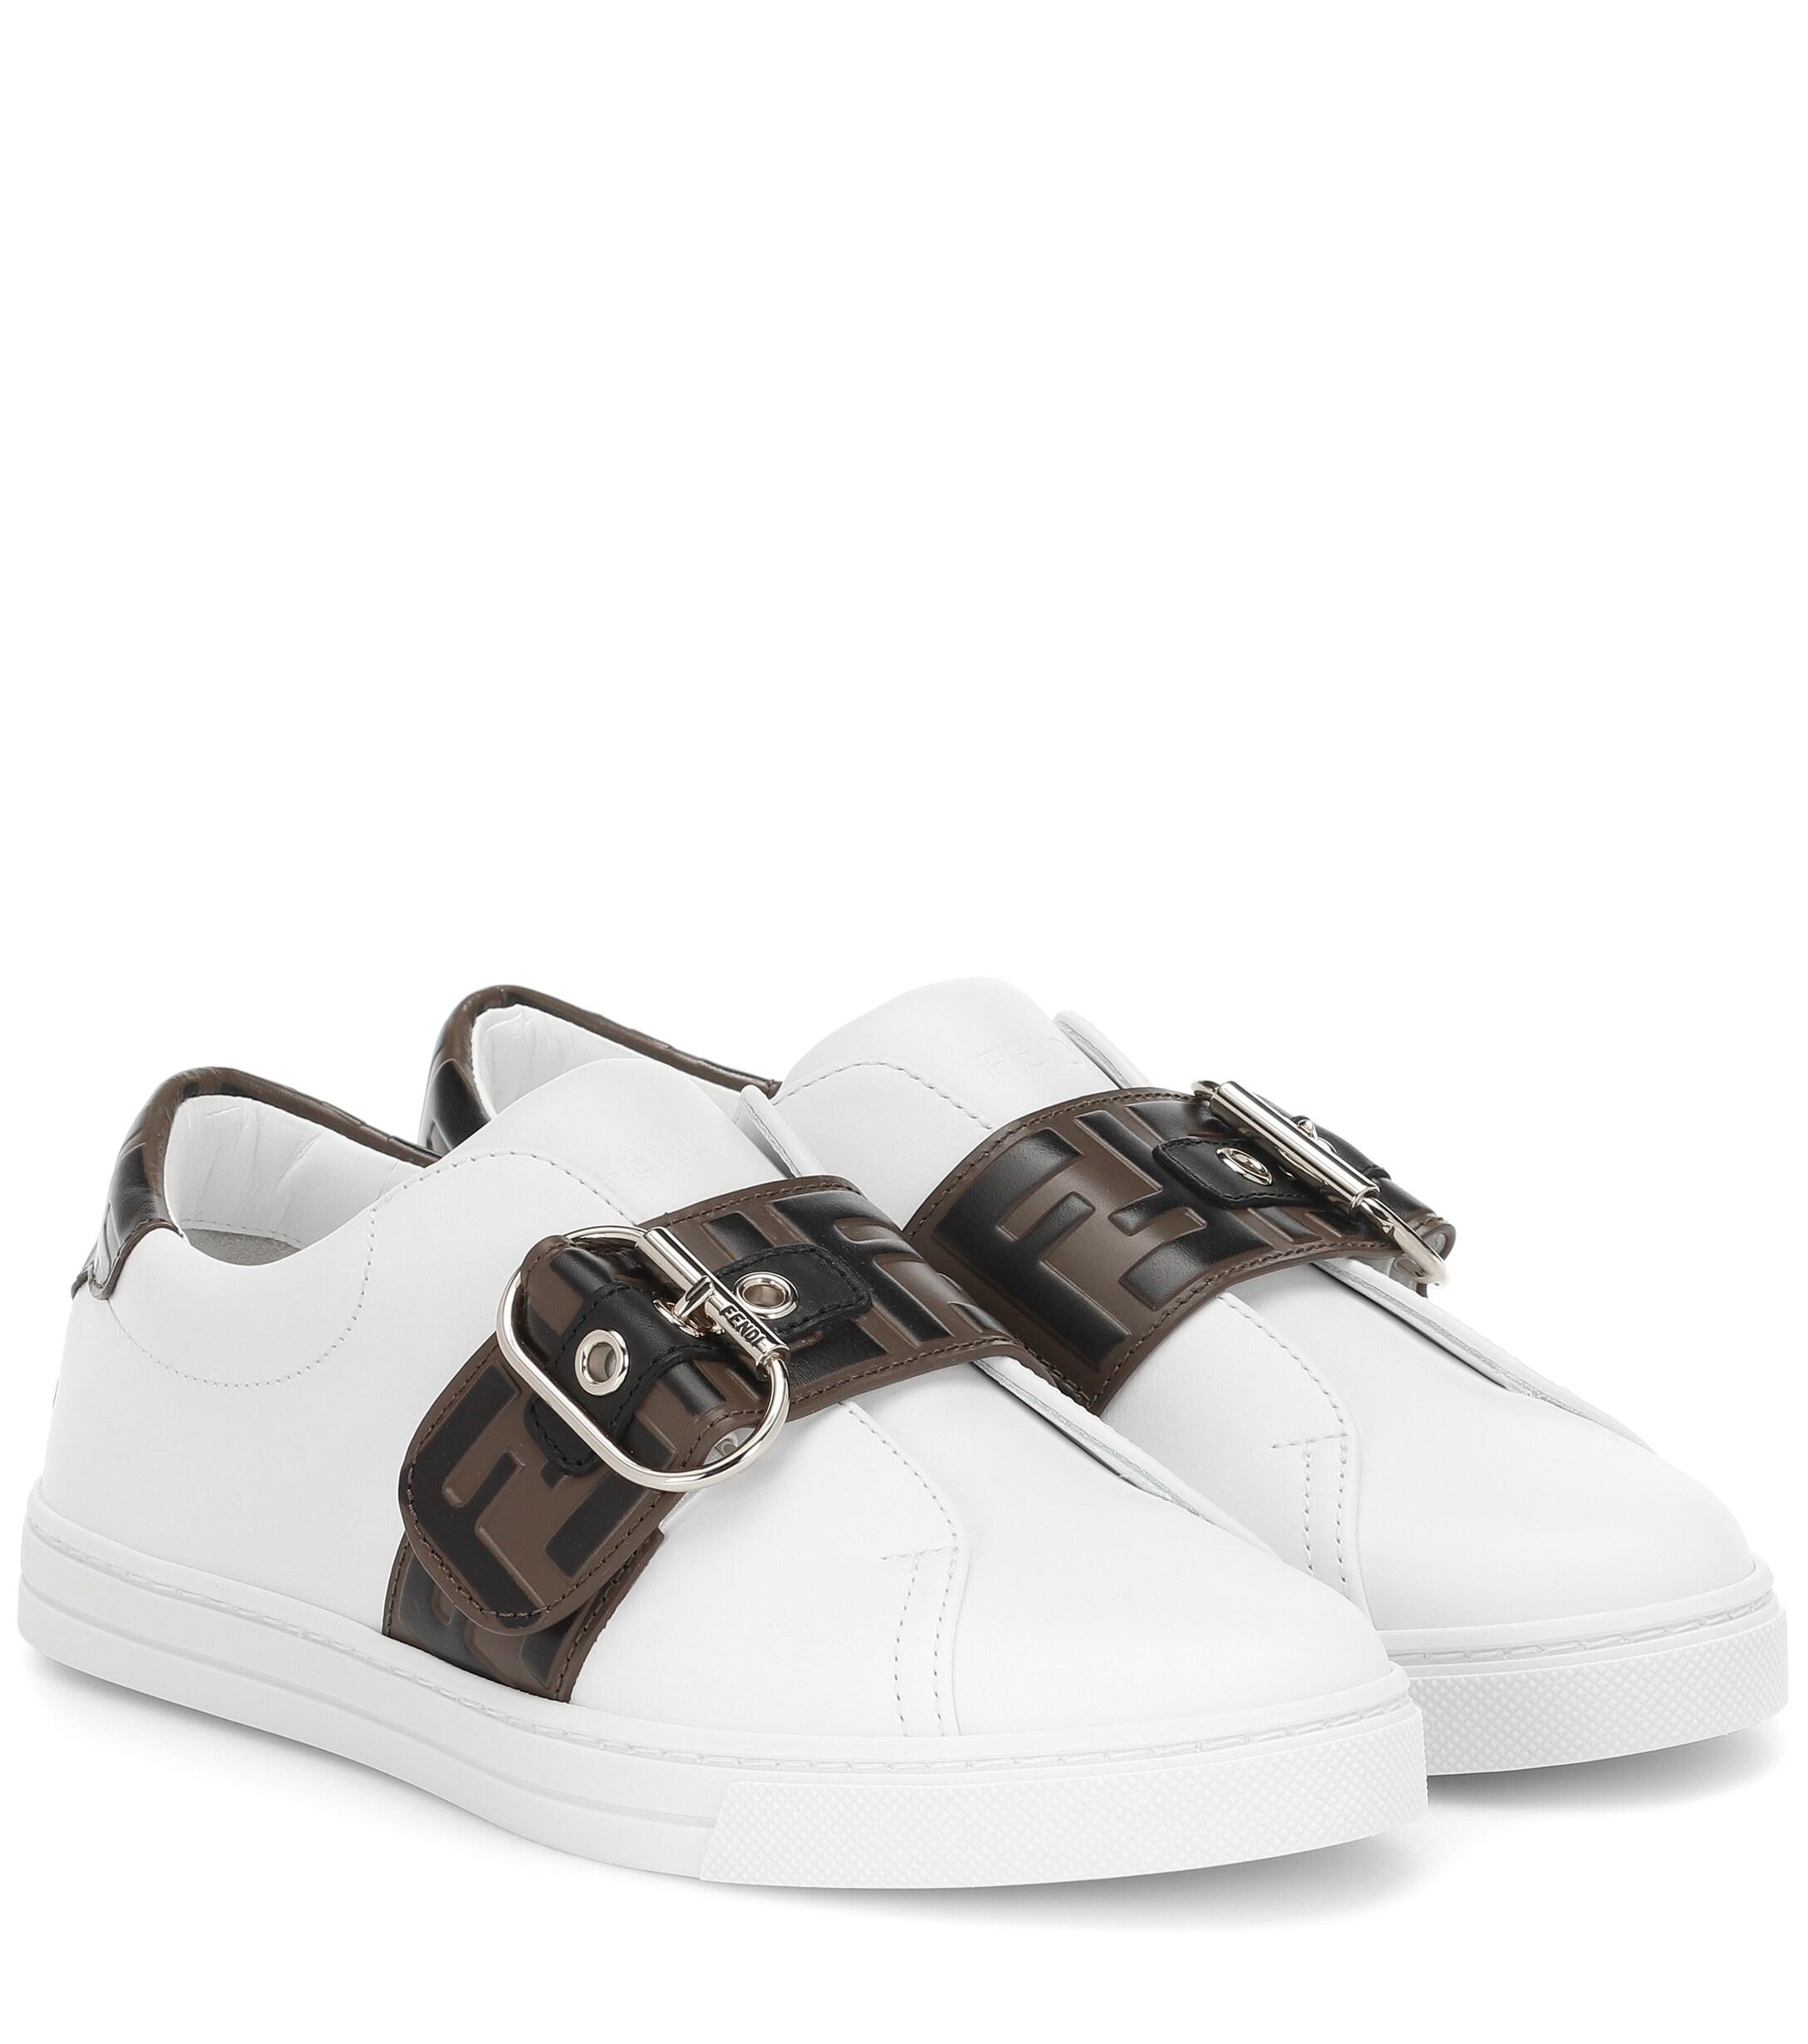 Fendi Leather Buckled Ff Motif Sneakers in White - Save 54% - Lyst